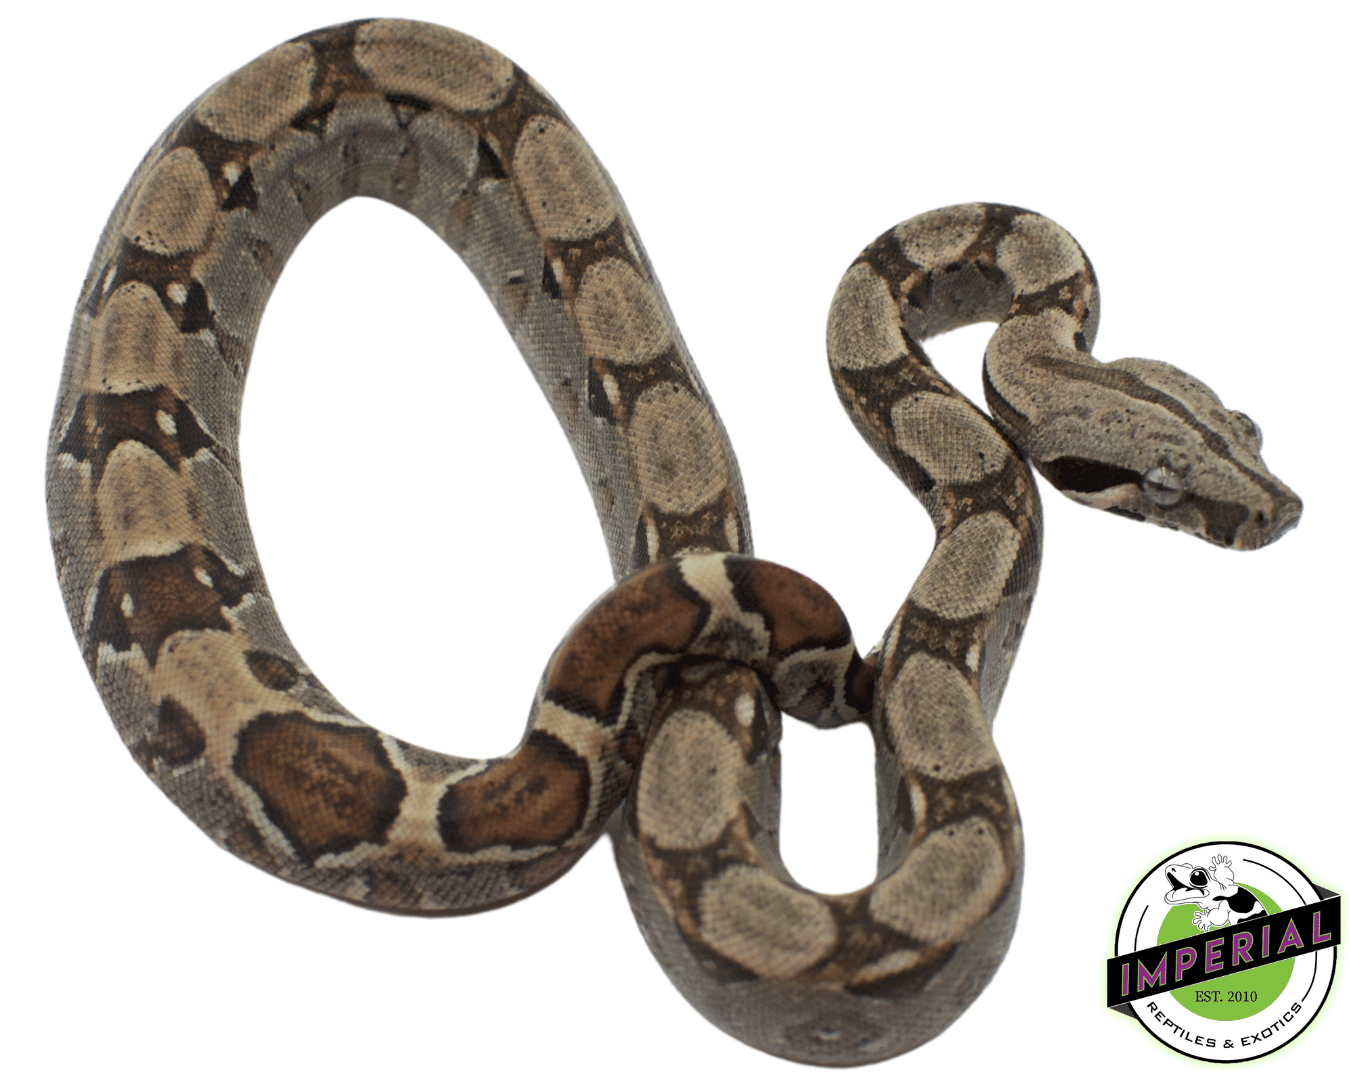 colombian boa constrictor for sale, buy reptiles online